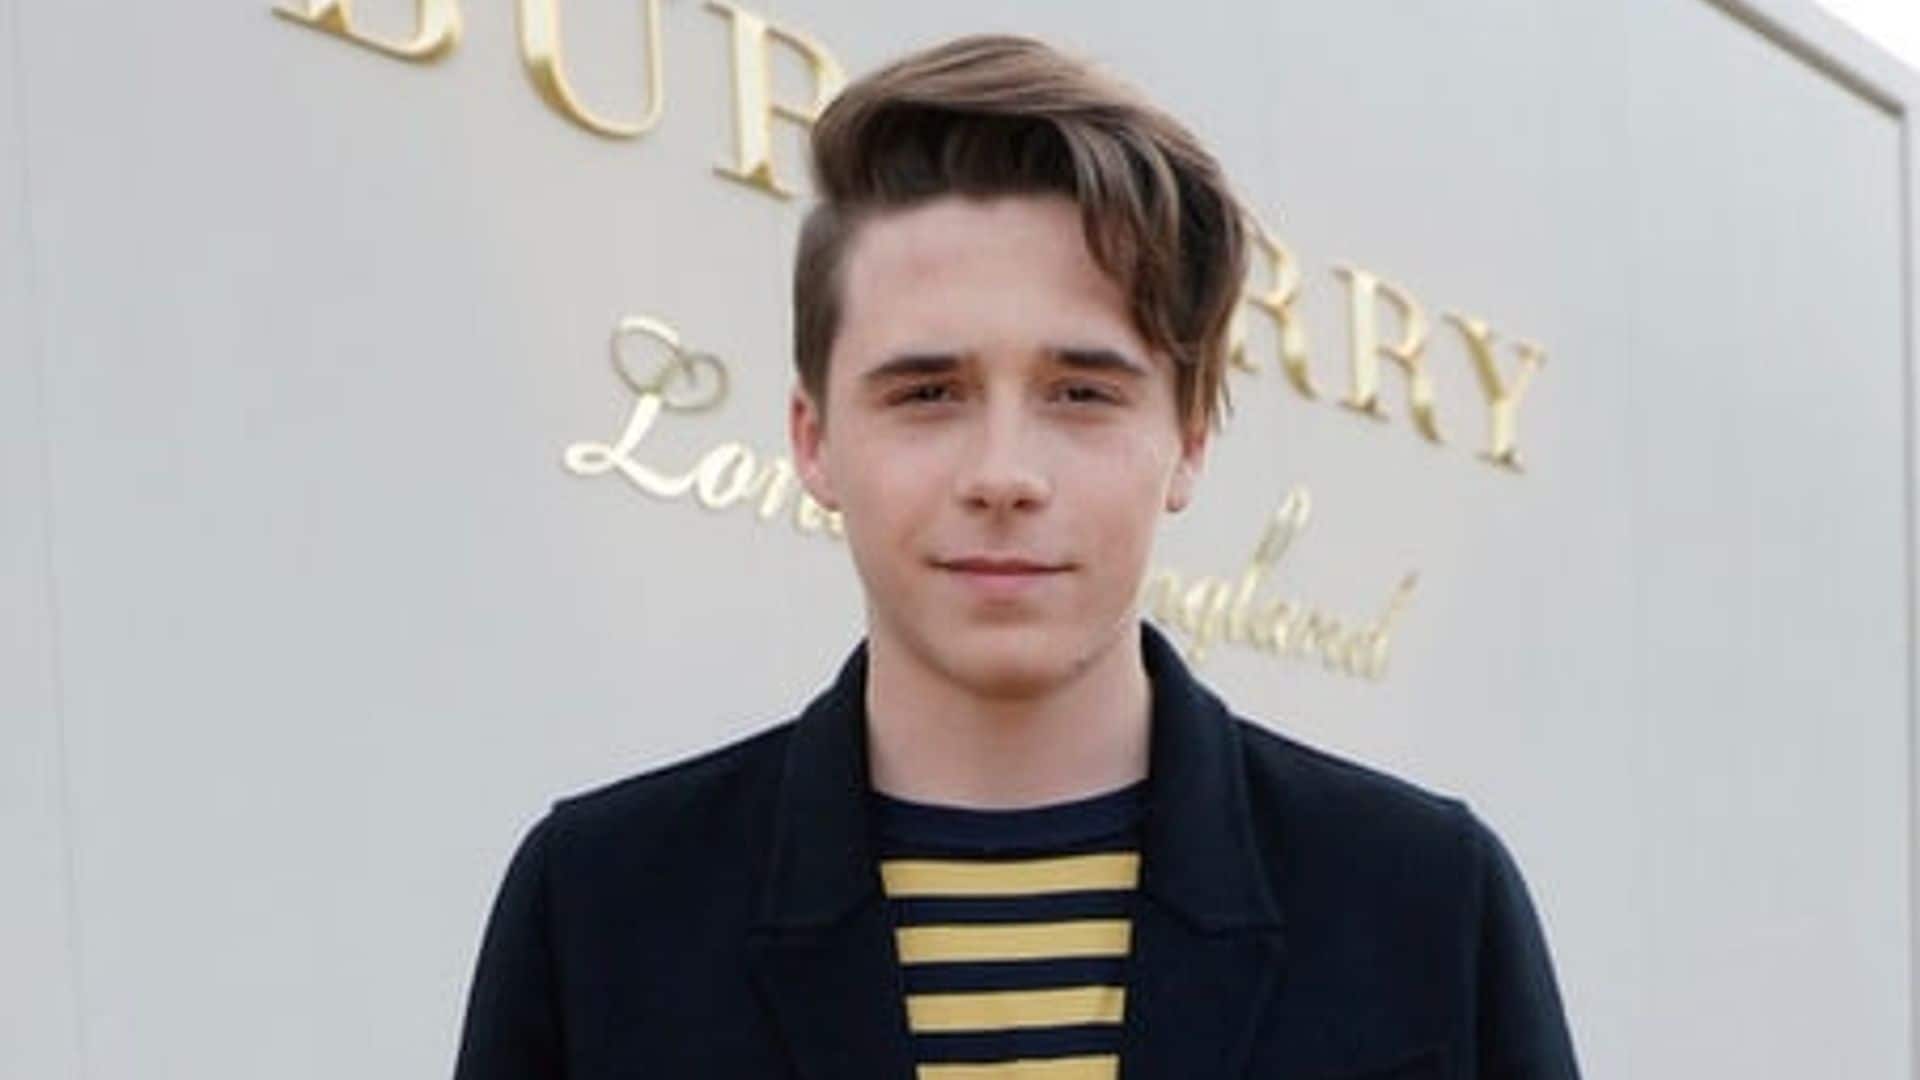 Brooklyn Beckham is officially a fashion photographer